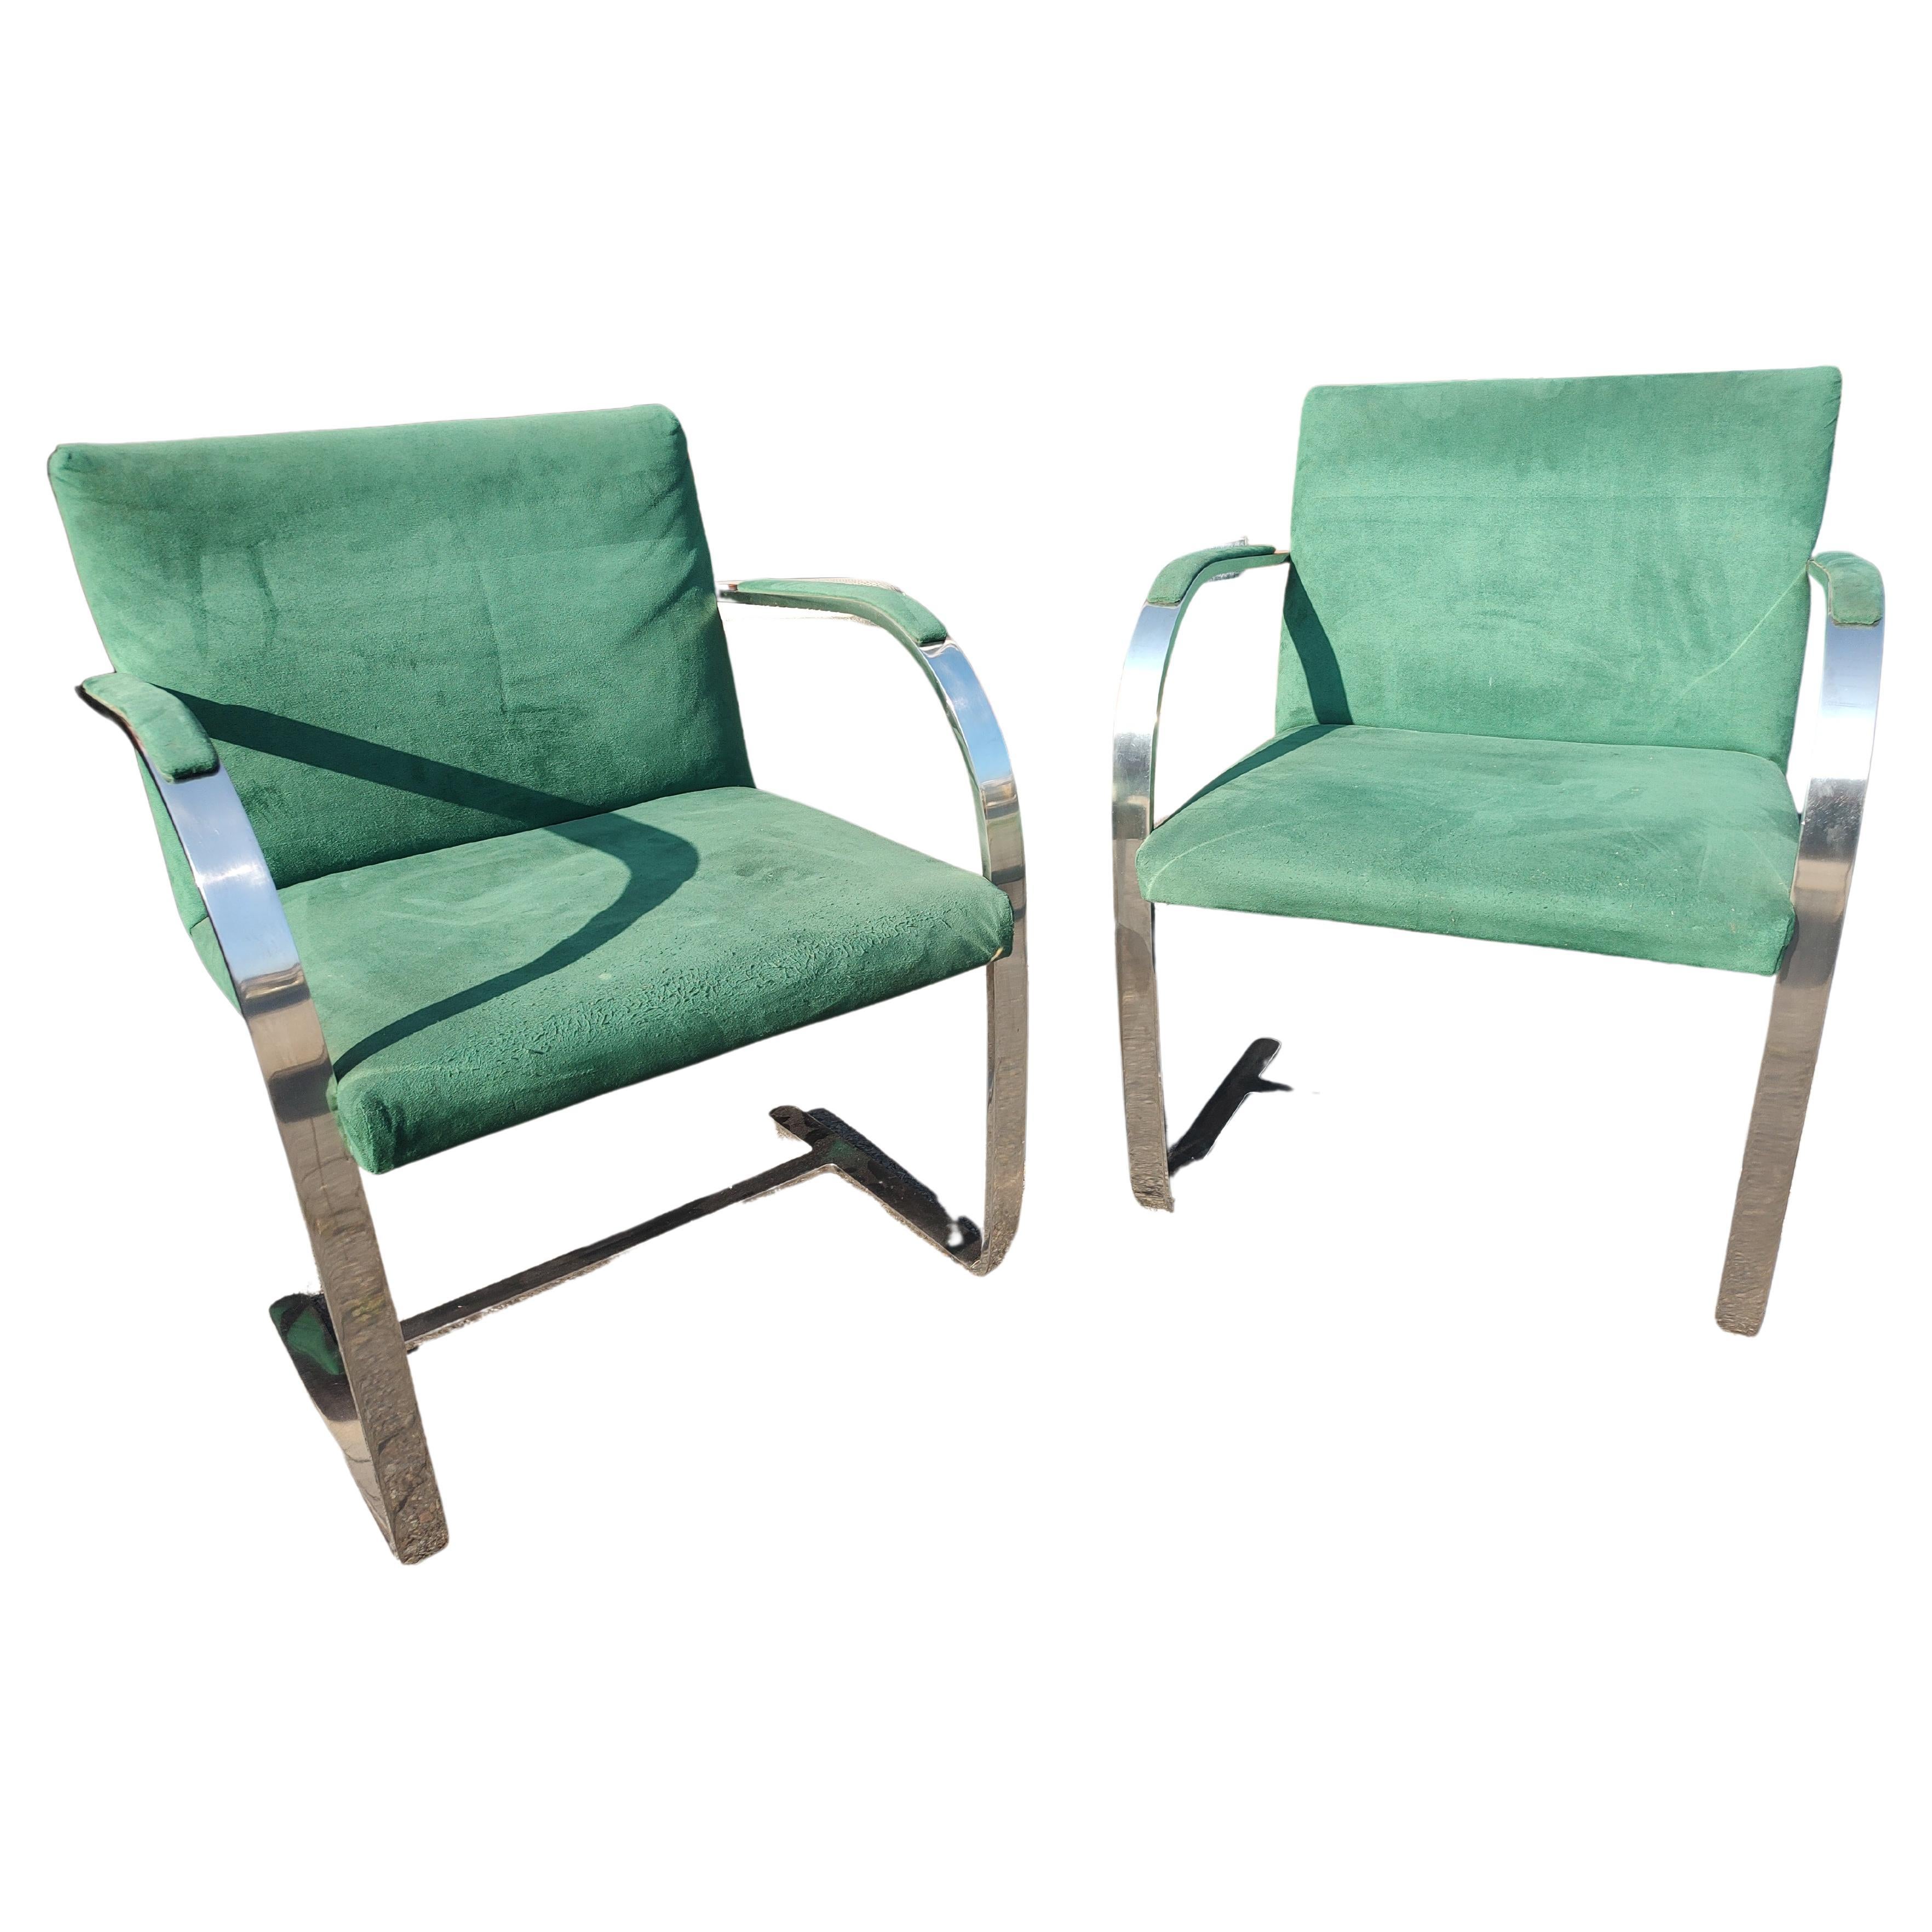 Pair of Mid Century Modern Bauhaus Styled Brno Chairs  Ludwig Mies van DerRohe  For Sale